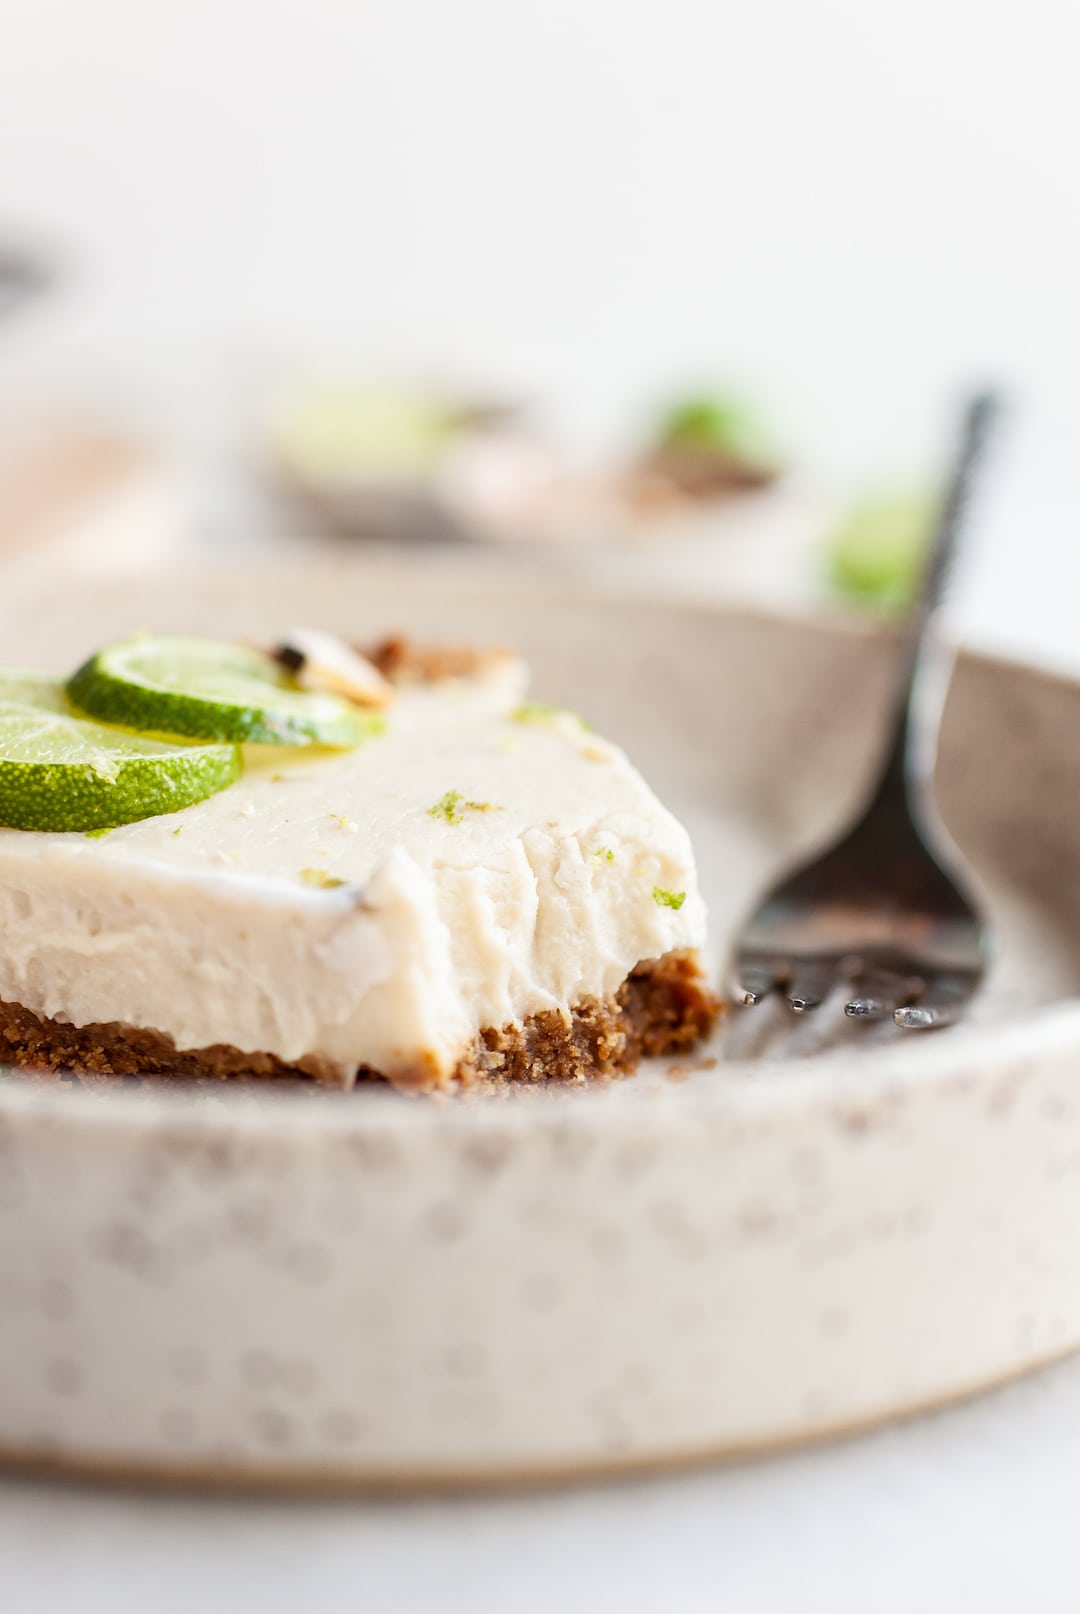 Vegan Key Lime Pie slice up close from the side with a bite taken out